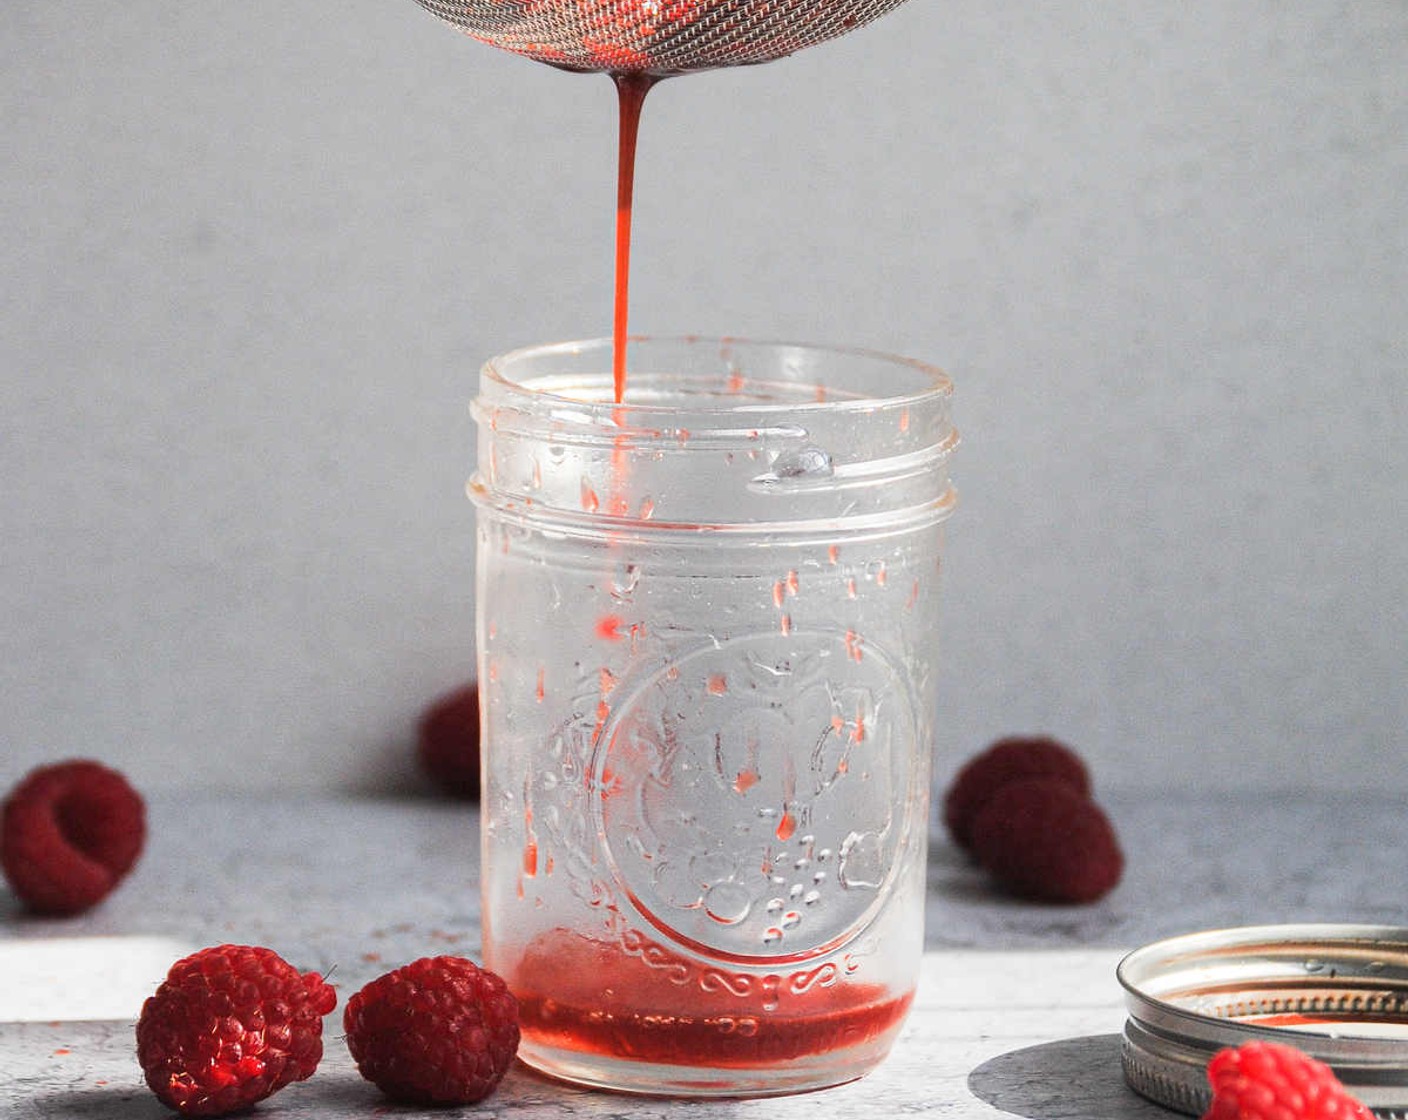 step 3 Pour simple syrup into a glass through a sieve. Use a spatula to push down on the raspberries in the sieve, expressing as much raspberry juice as possible into the glass.